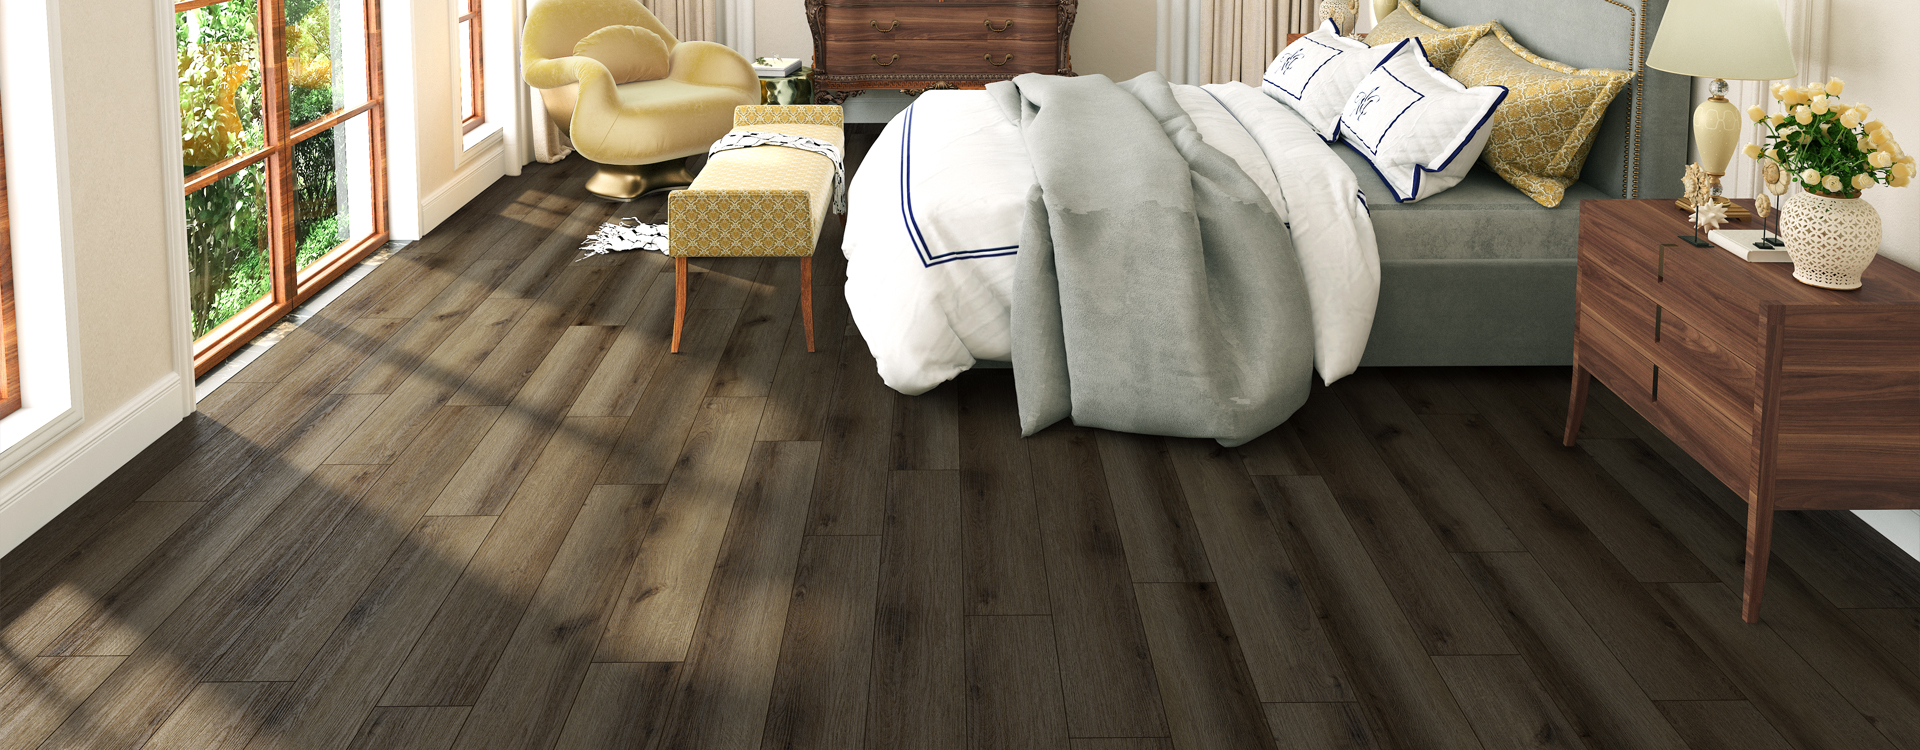 Horizen Flooring presents to you a picture of a quality wide plank Meredith luxury vinyl plank. NovoCore Q Merengue collection features a wide range of colors & designs that will compliment any interior. Natural wood grain synchronized surface allow for an authentic hardwood look & feel. This collection features a 0.3″ / 7.5 mm overall thickness and a durable 22 mil / 0.55 mm wear layer for residential and commercial applications.